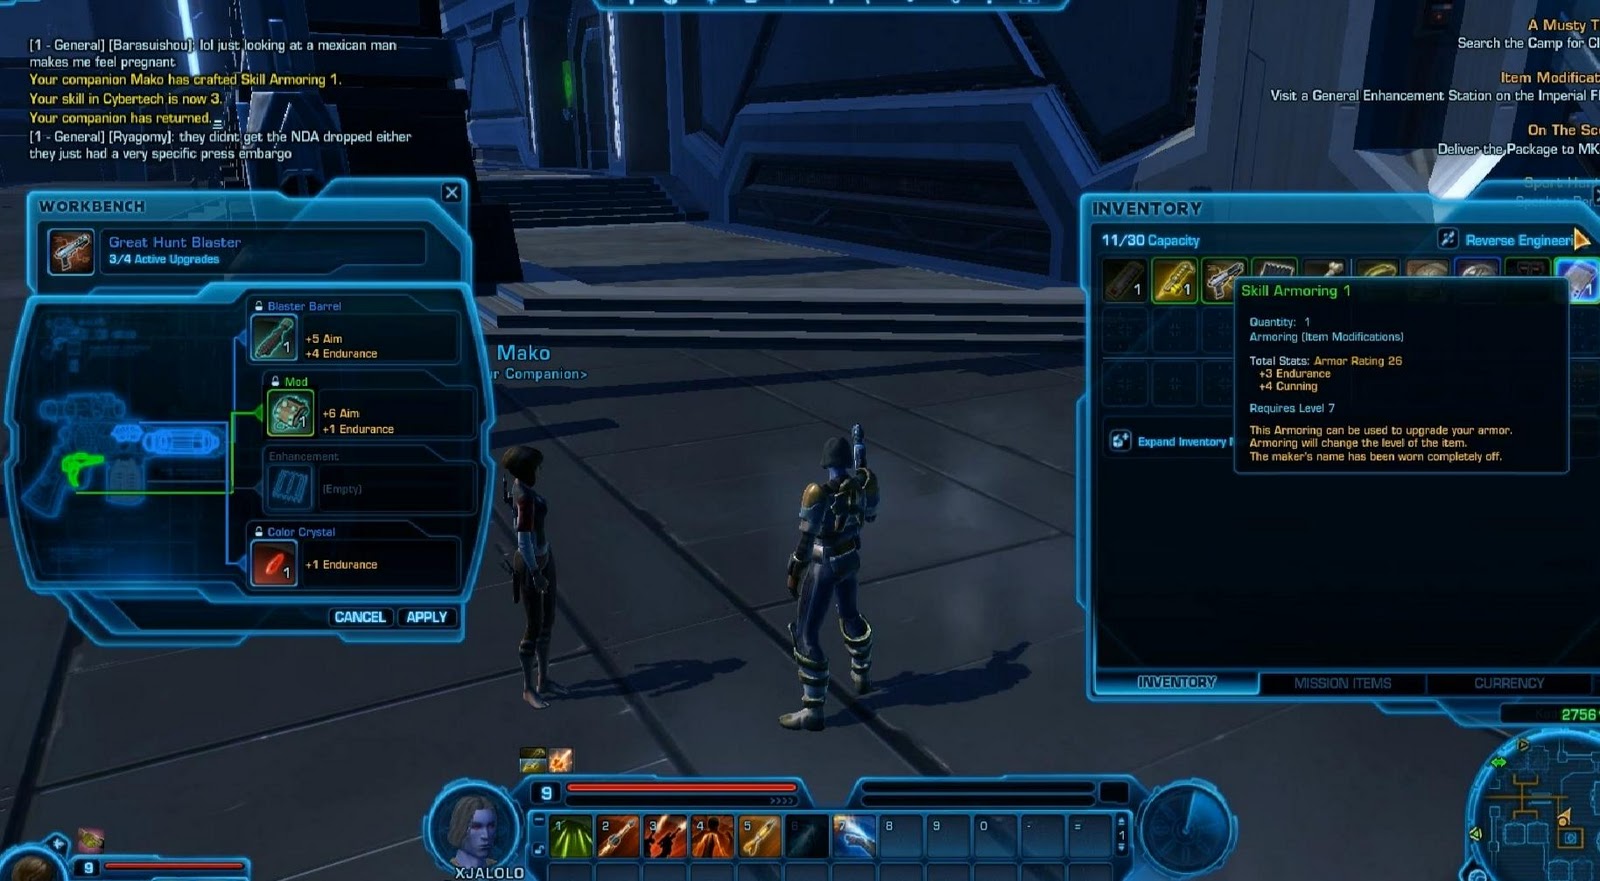 swtor story order 5.5